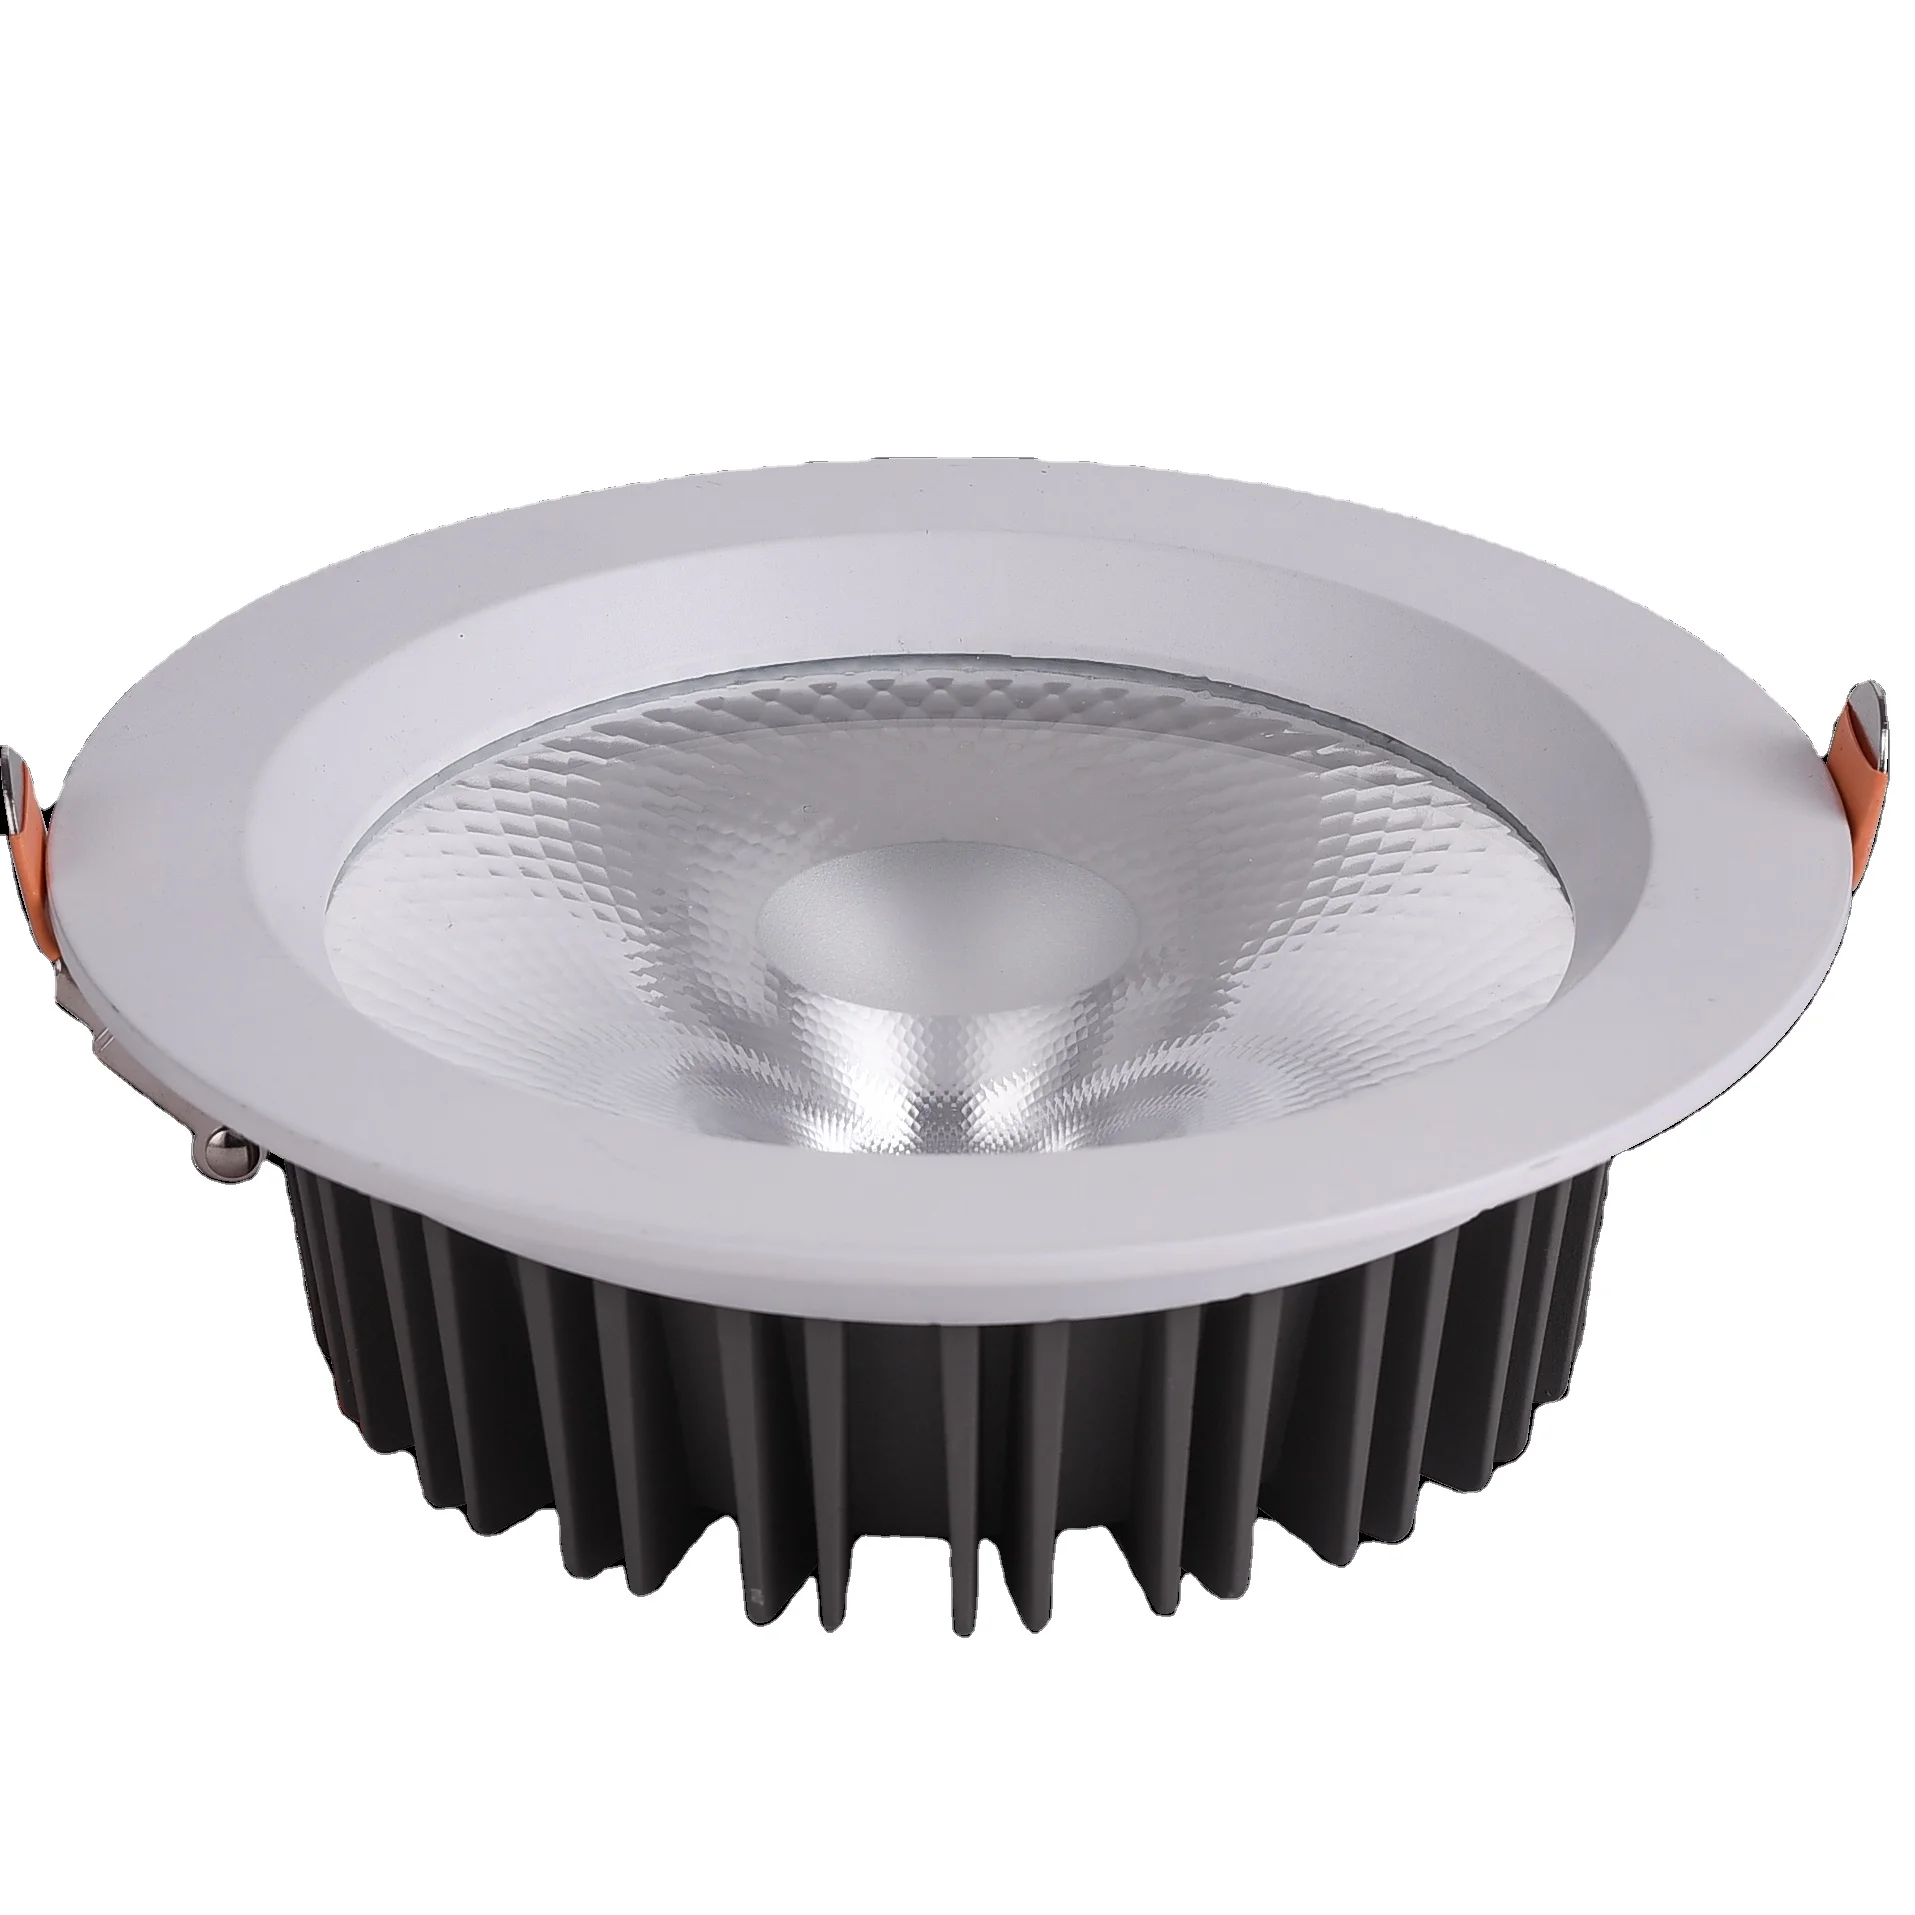 2020 New China manufacturer exhibition halls ceiling recessed mounted led glass 30w downlight